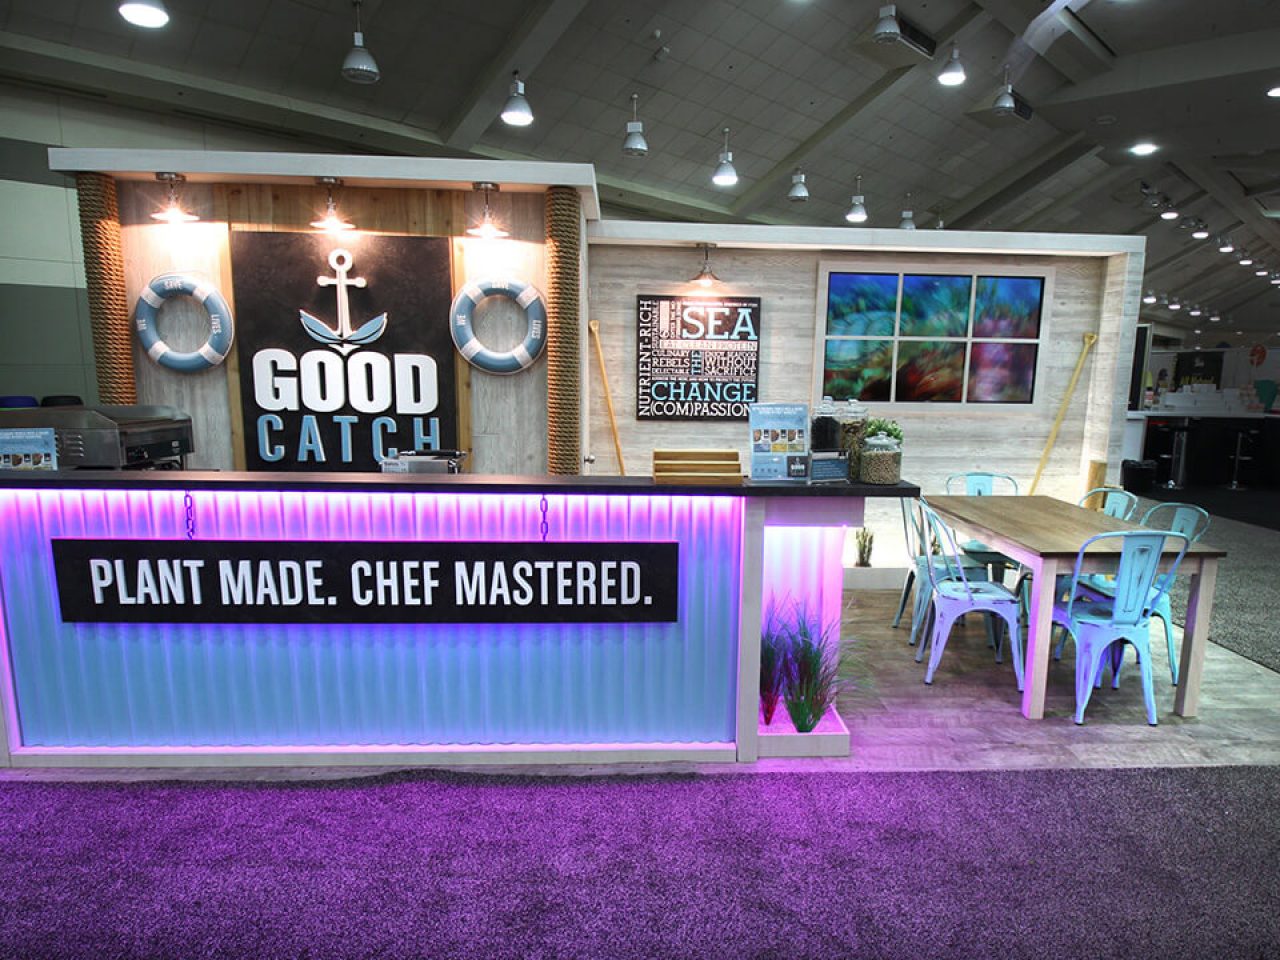 Custom Exhibit for Good Catch at Natural Products Expo East